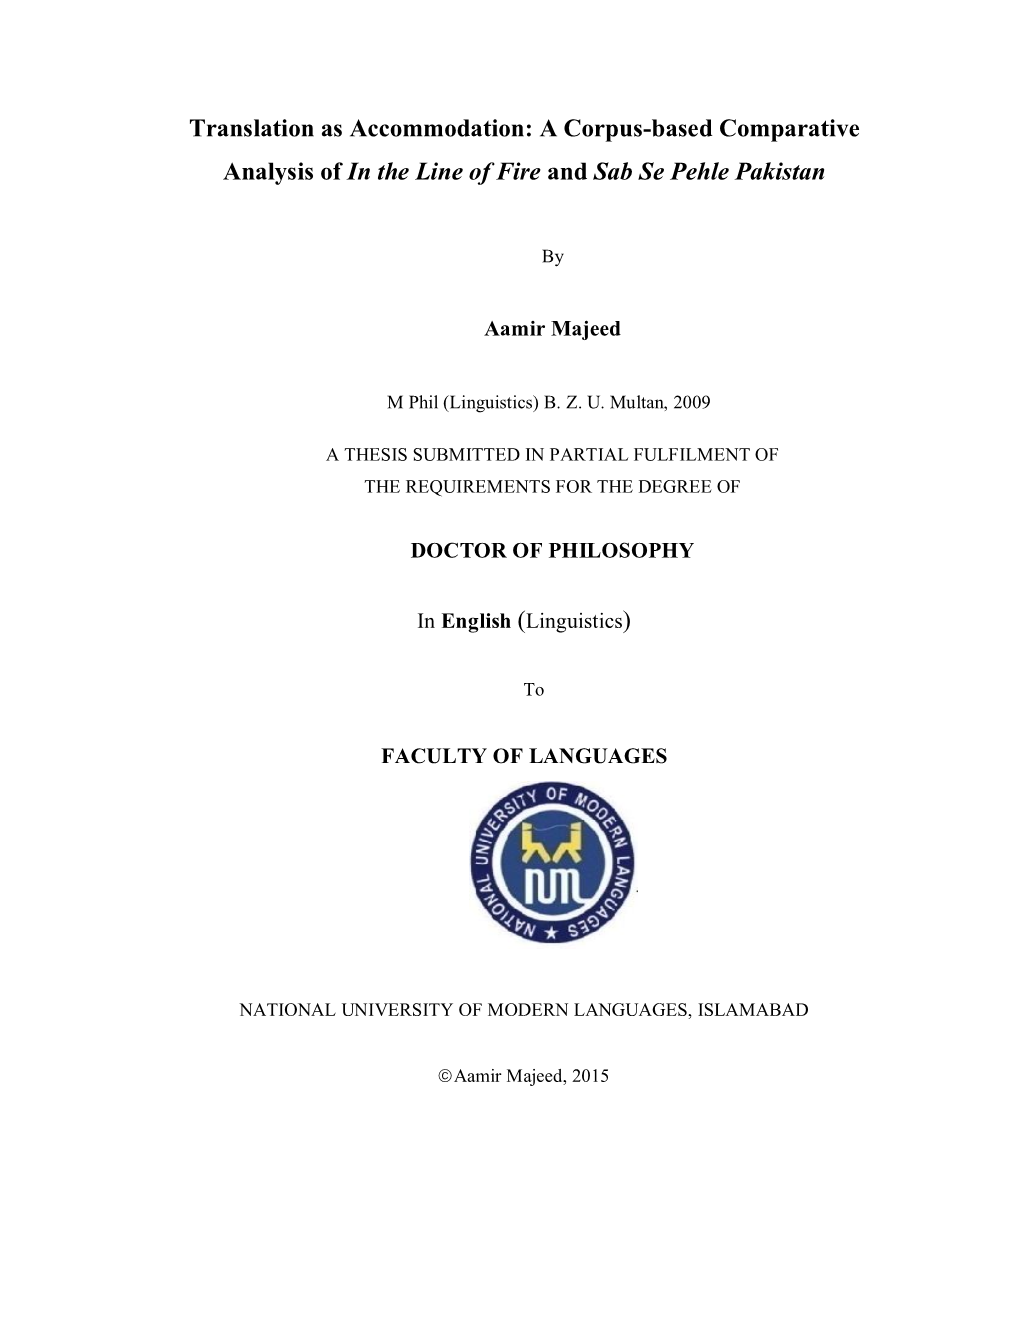 A Corpus-Based Comparative Analysis of in the Line of Fire and Sab Se Pehle Pakistan